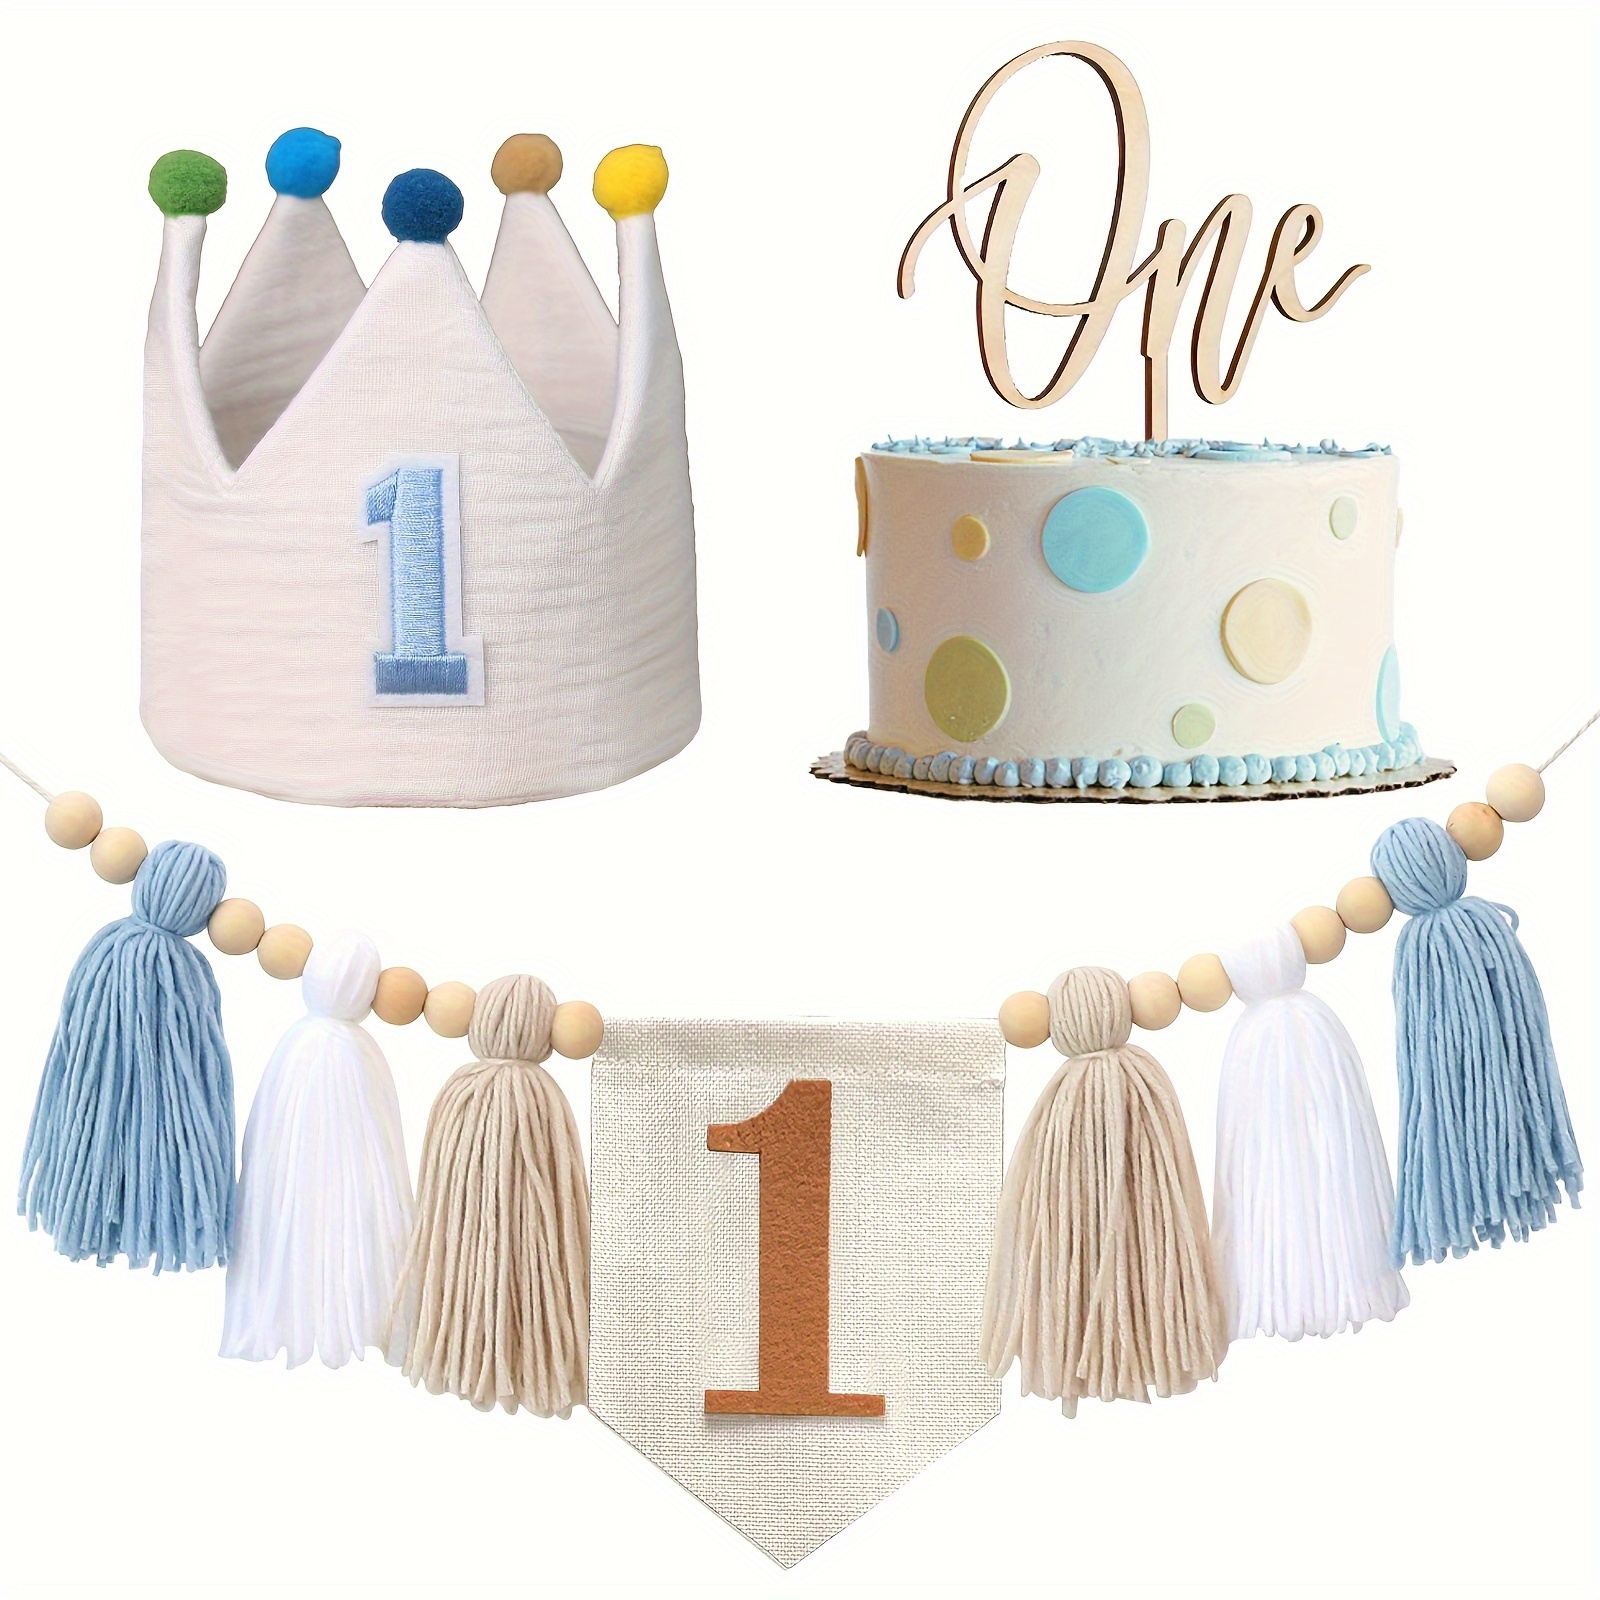 

Blue Tassel Highchair Birthday Banner Set With Handmade Fabric Crown And 'one' Cake Topper - Perfect For First Birthday Party Decorations And Photo Props, No Electricity Required